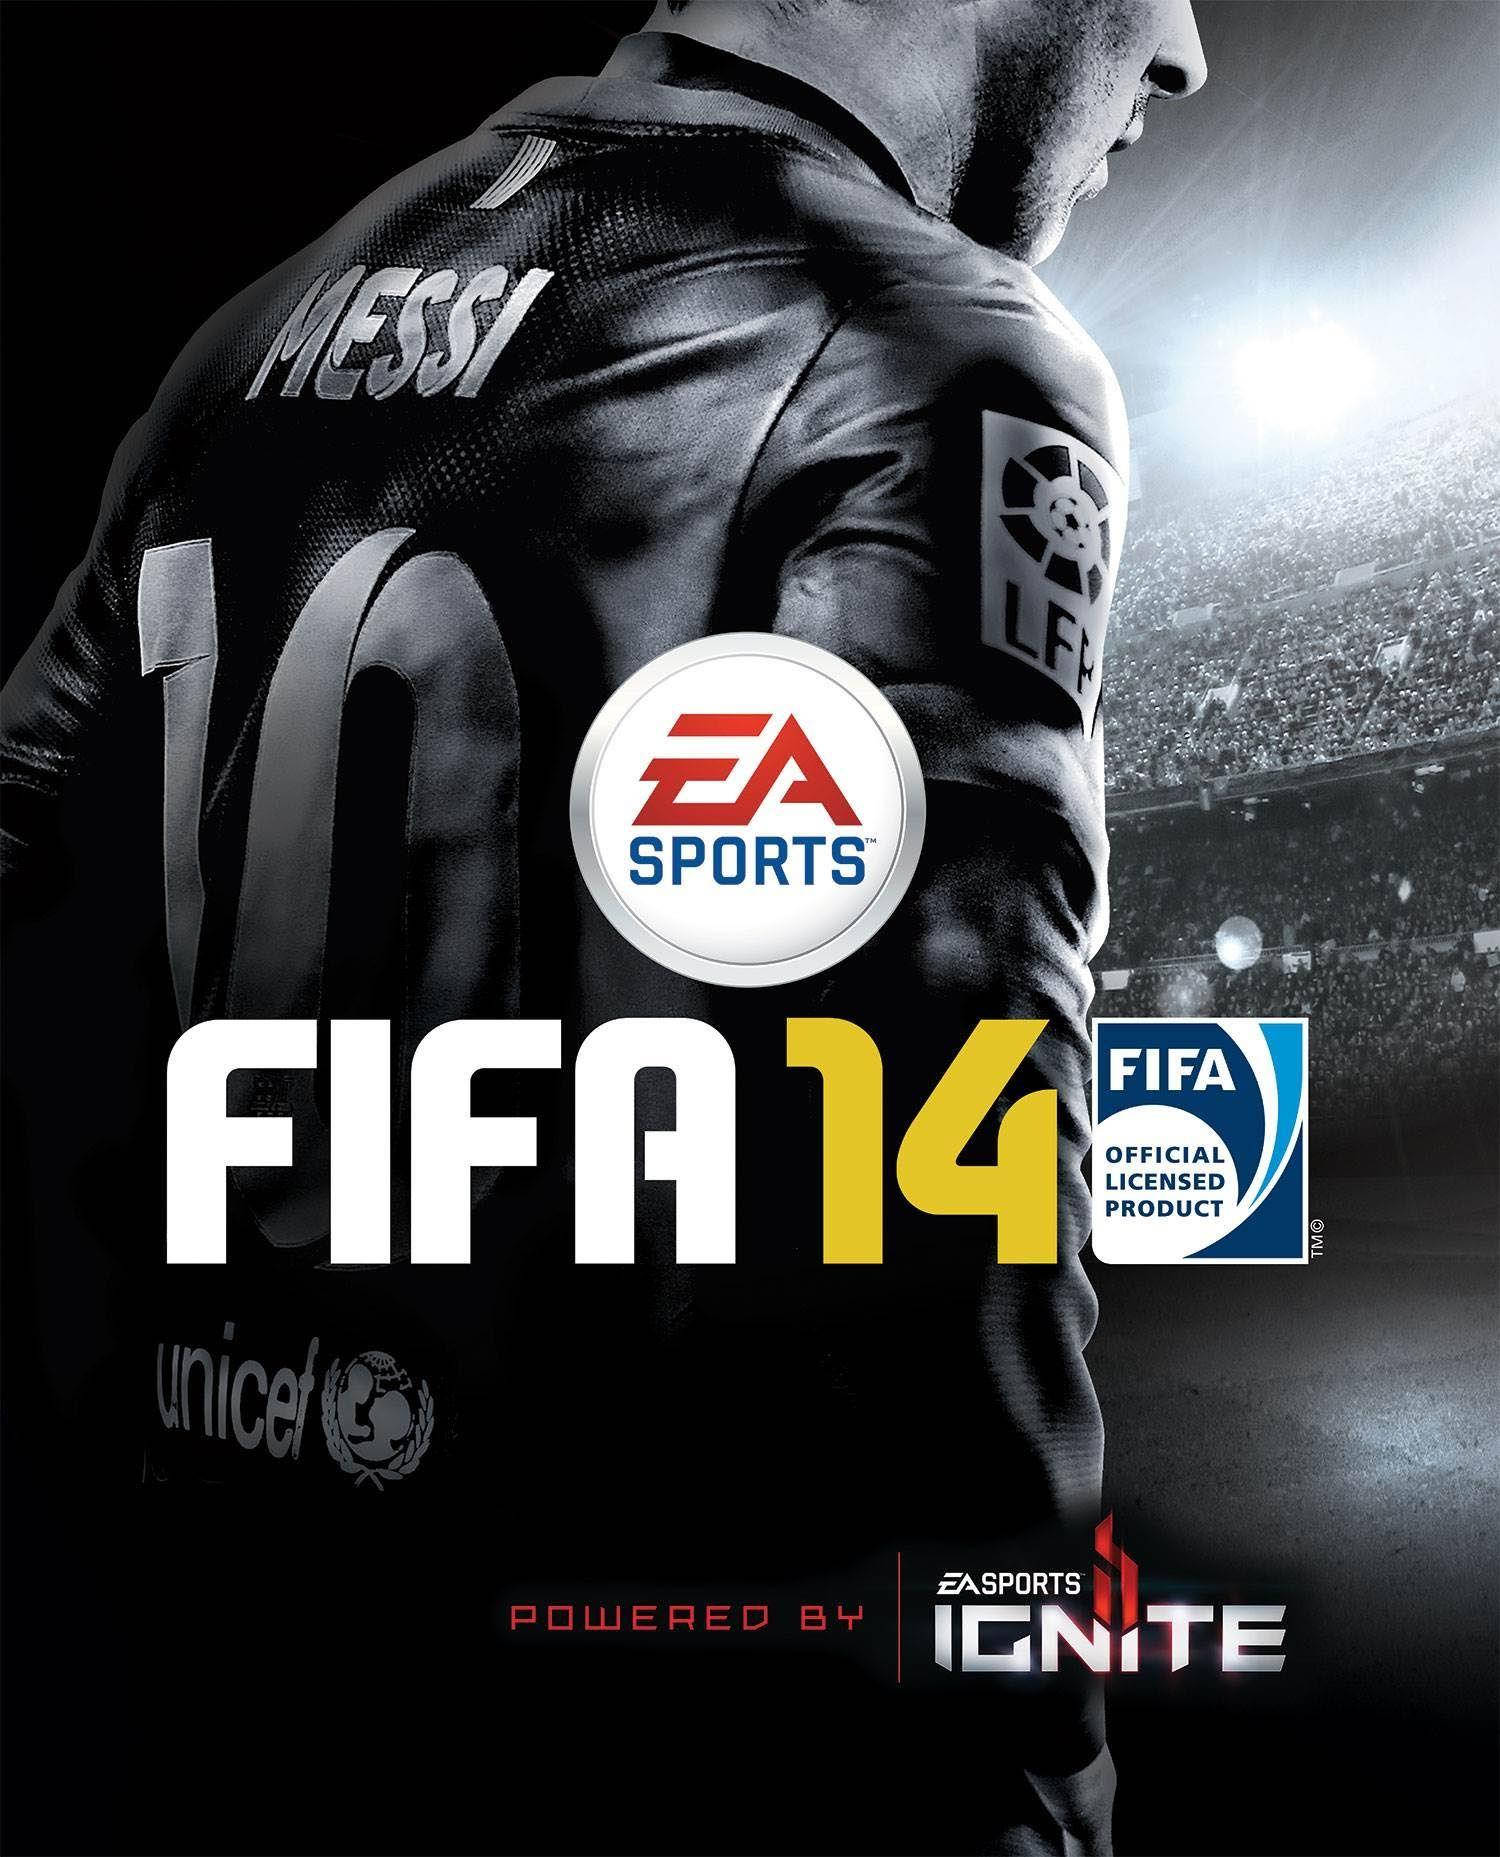 Fifa 14 Powered By Ignite Wallpaper